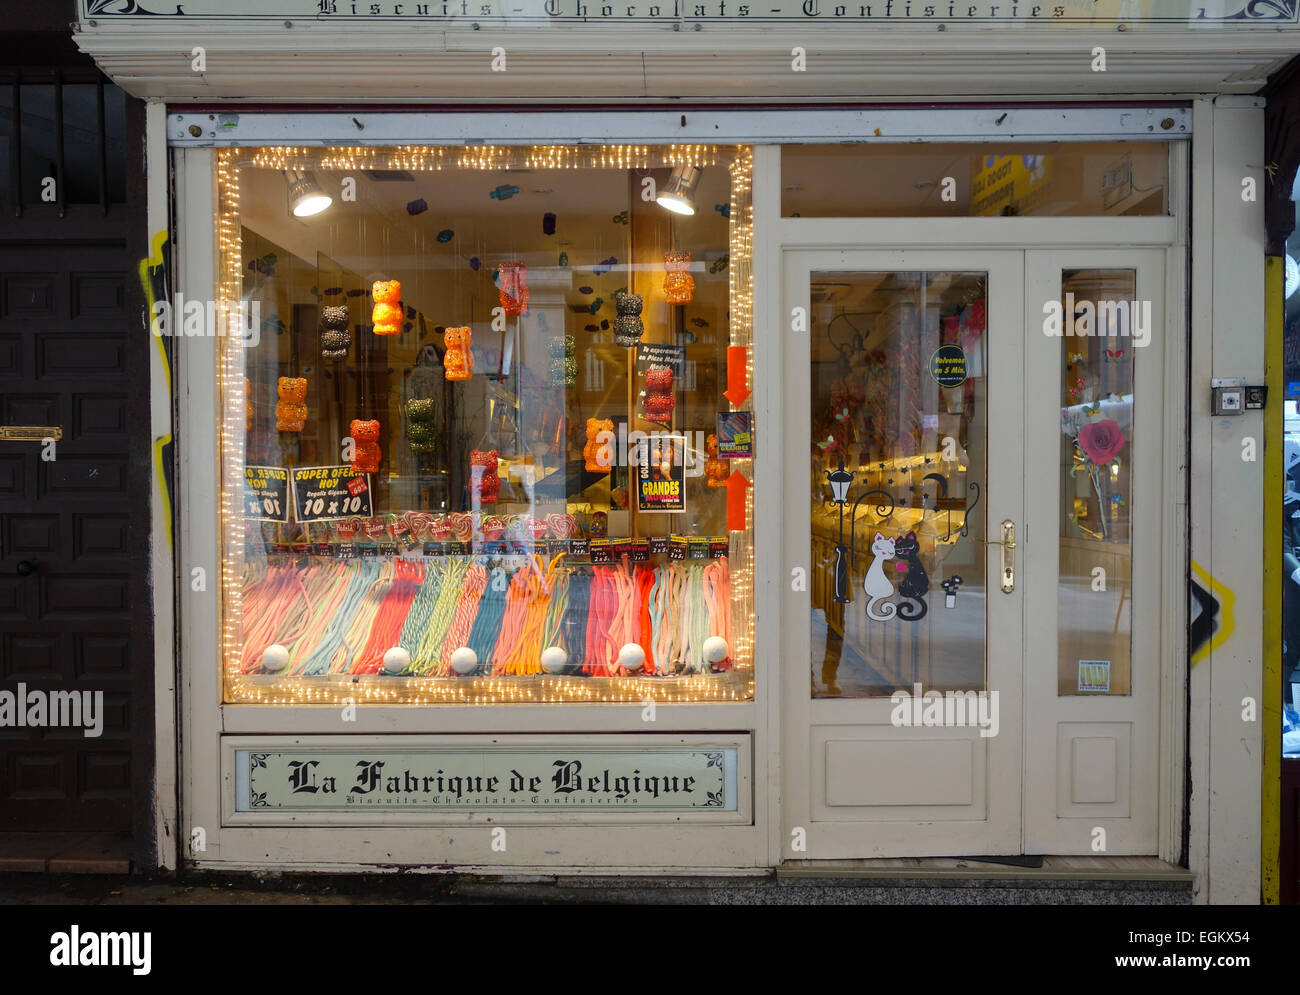 La Fabrique de Belgique, Candy store, shop, Giant licorice and sweets on display, Madrid, Spain Stock Photo